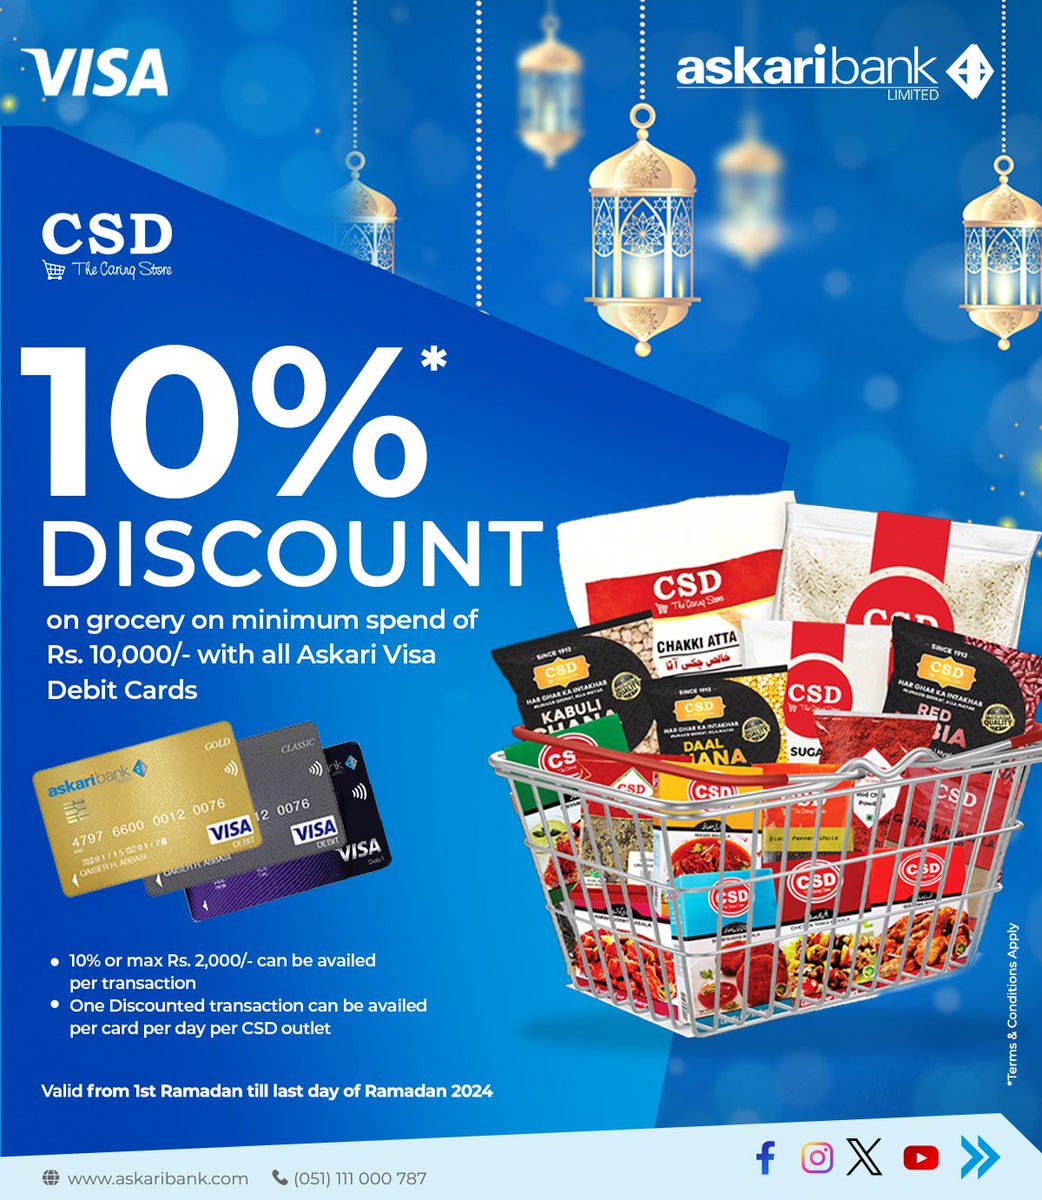 This Ramadan, enjoy amazing savings on your groceries at CSD! Get 10% discount on your grocery shopping when you spend Rs. 10,000 or more with your Aksari Visa Debit Card. Offer valid from 1st Ramadan till last Ramadan 2024. Link: rb.gy/khhnik #askaribank